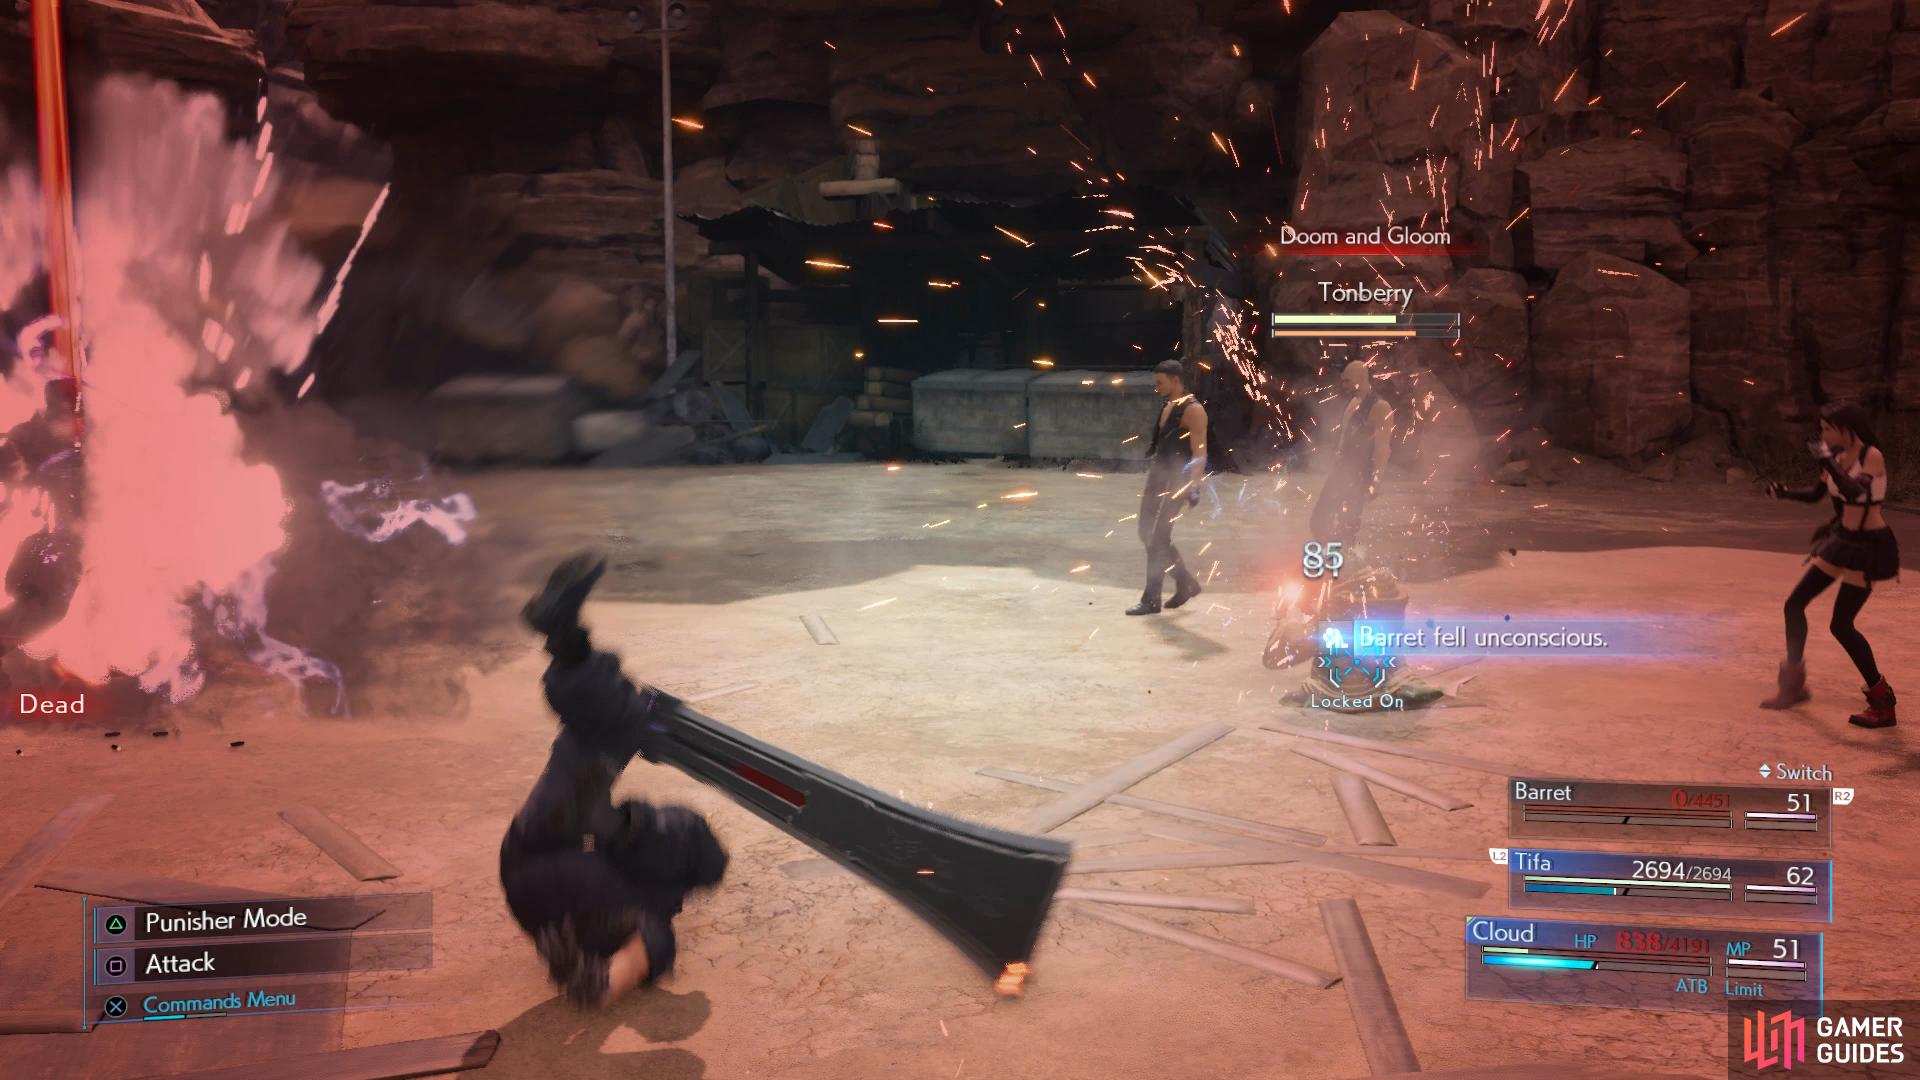 Doom and Gloom is a ranged Instant Death attack on anyone who uses an ability at range such as Overcharge.